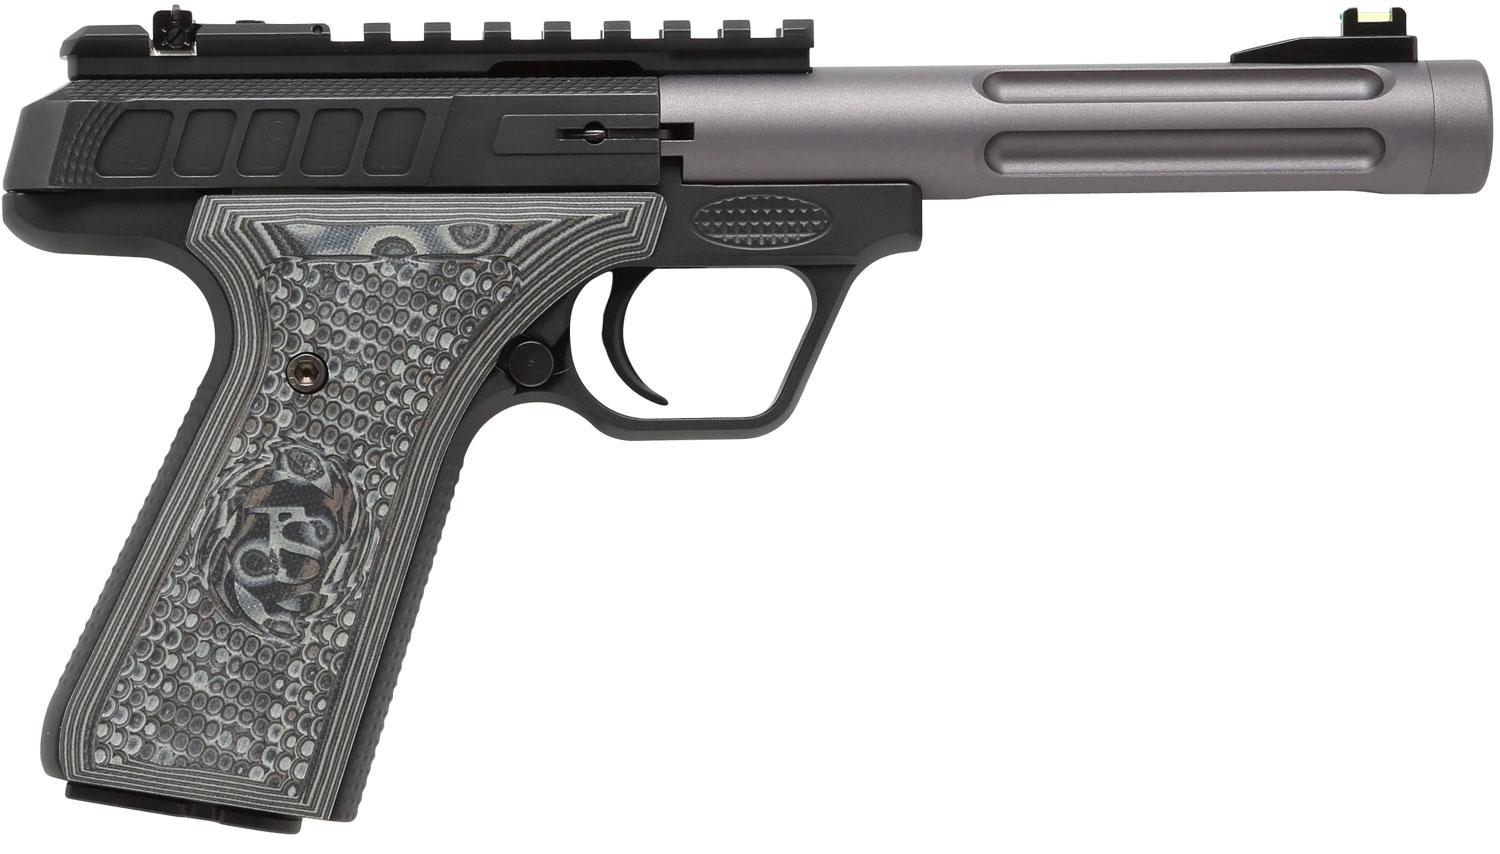 Tactical Solutions TLP-22 Pistol TLP55GMGRF, 22 Long Rifle, 5.5", Gray G10 Grips, Black Hard Coat Anodized Finish, 10 Rd